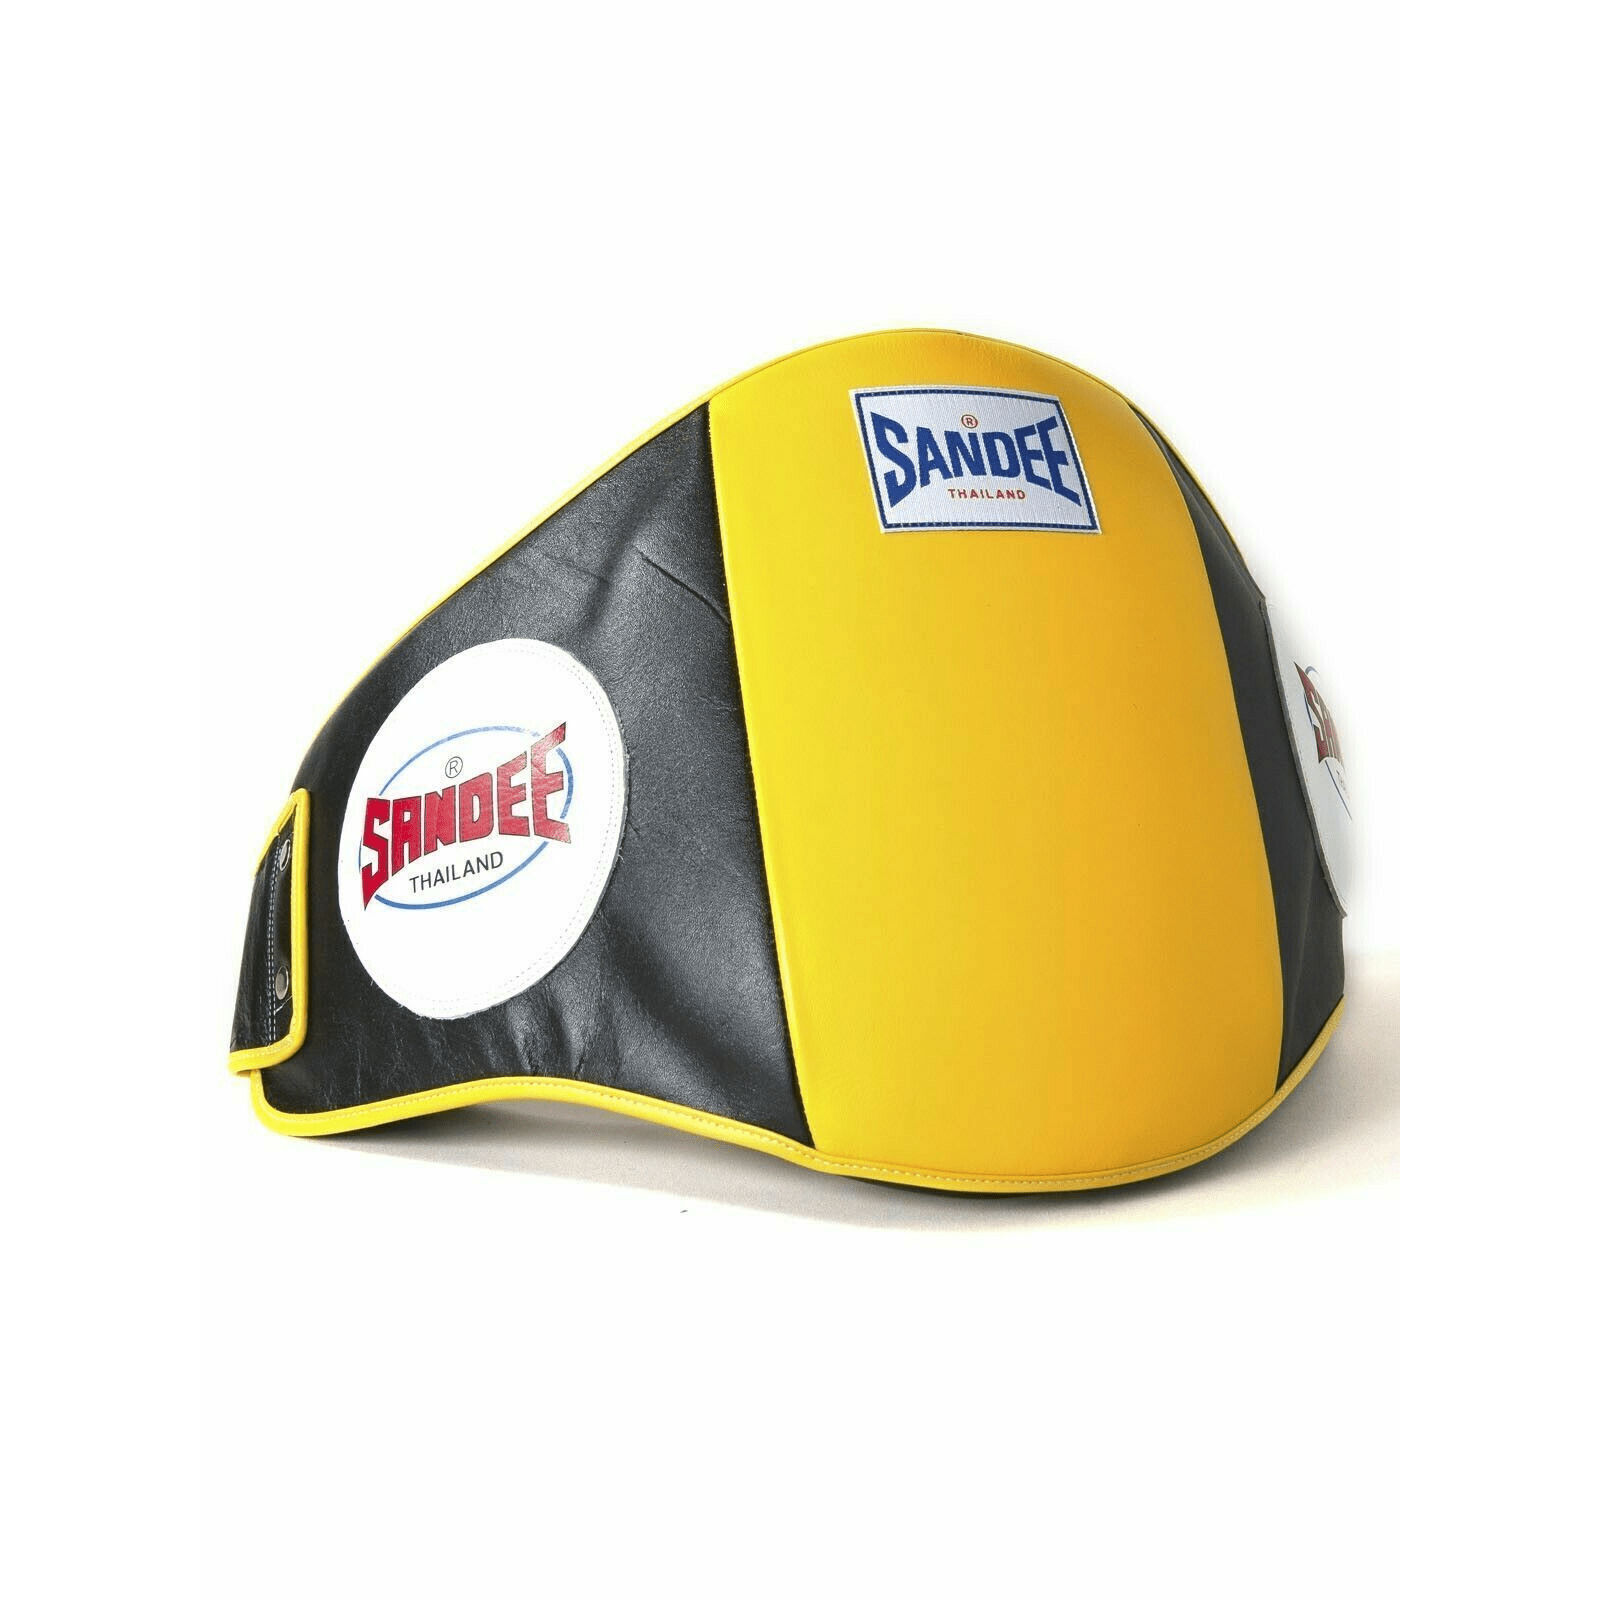 Sandee Muay Thai Boxing Belly Pad Black & Yellow Leather Training  Fight Co